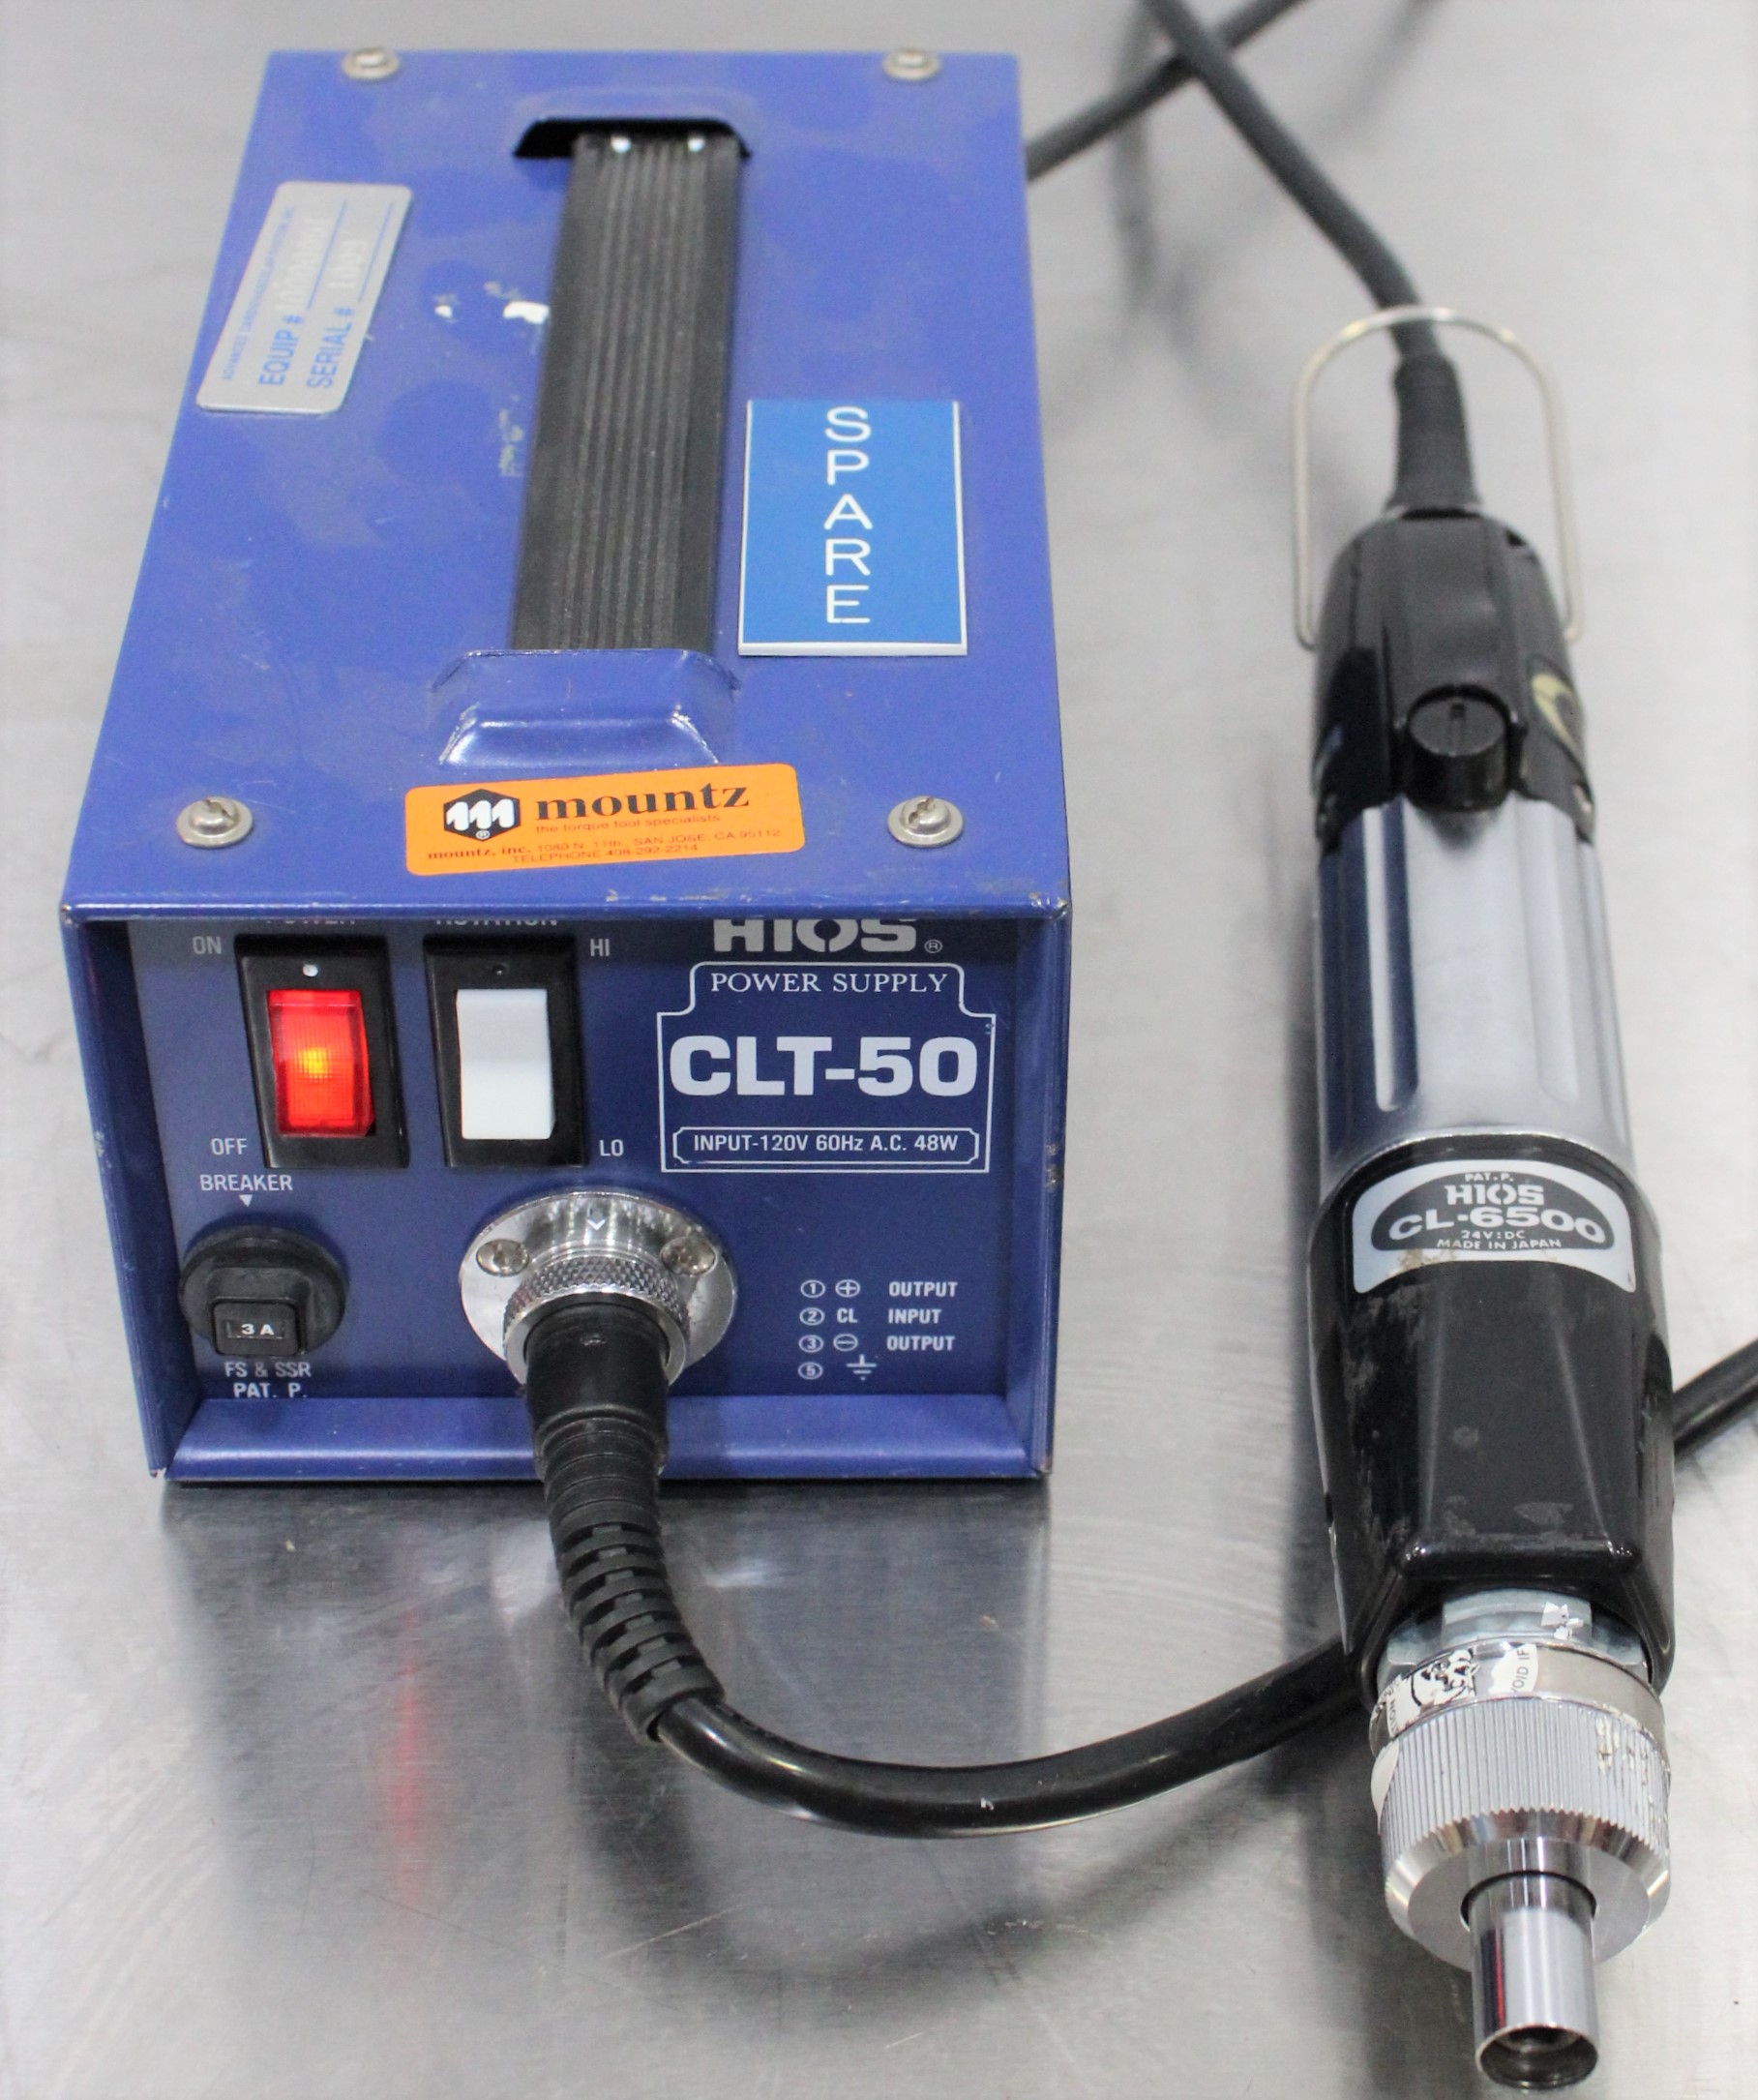 HIOS CL-6500 Electric Torque Screwdriver Tested and working! 